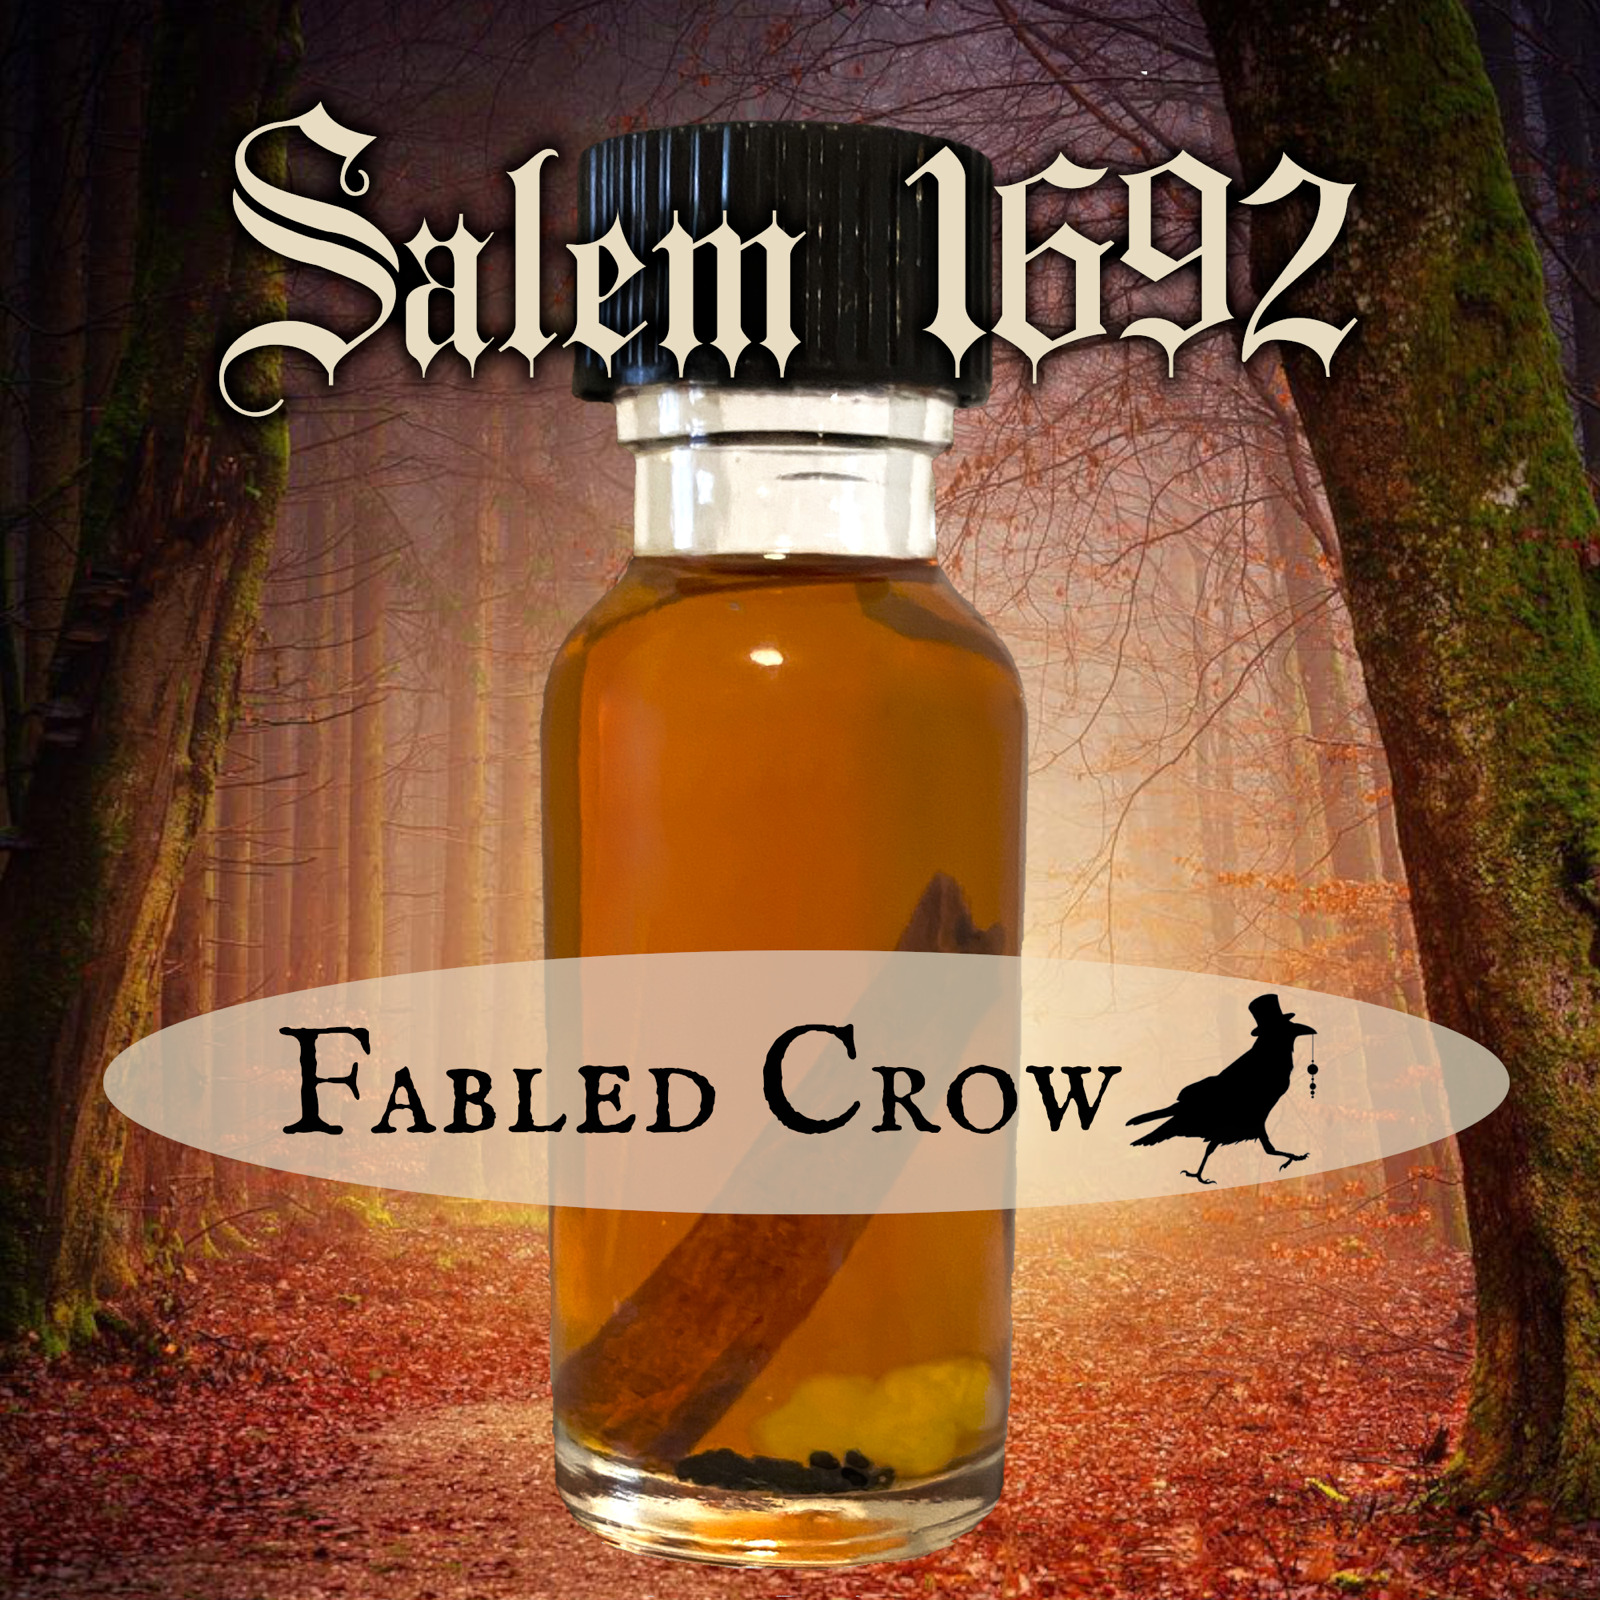 SALEM 1692 Oil Witch Perfume Occult Amber Spicy Personal Power FABLED CROW